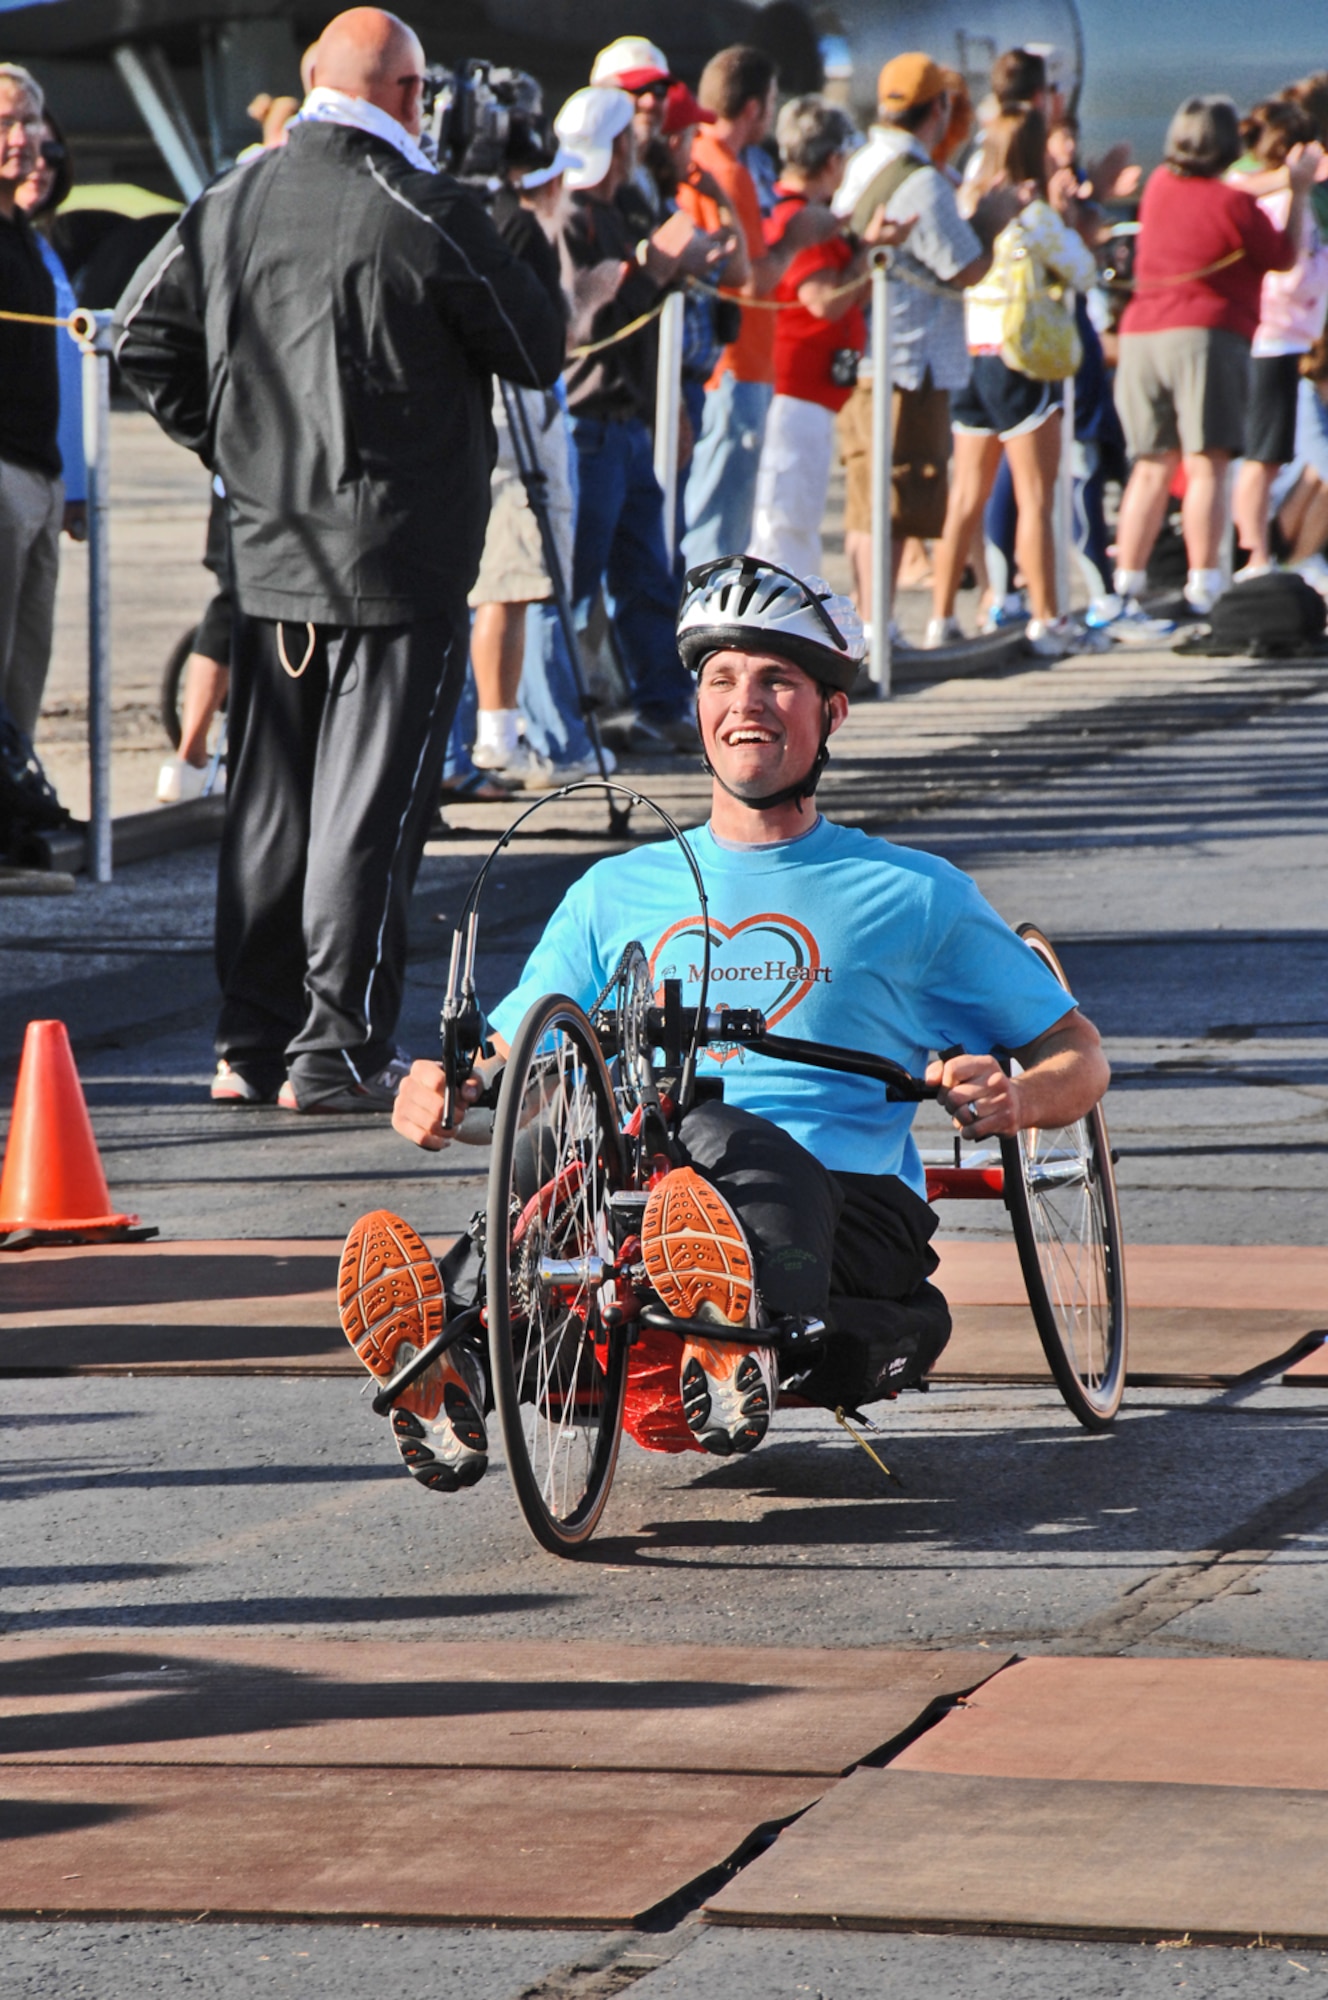 John Moore of Centerville, Ohio, crosses the finish line after completing the U.S. Air Force Marathon Sept. 19, 2009 at Wright-Patterson Air Force Base, Ohio. Moore was paralyzed from the waist down in Septermber 2008 during an accident following the passage of Hurricane Ike. He remains a firefighter with the city of Kettering, where he supports educational outreach. He finished the 26.2 miles averaging just over 5 minutes per mile. His wife Meredyth ran the half marathon. (Air Force photo/Ben Strasser)